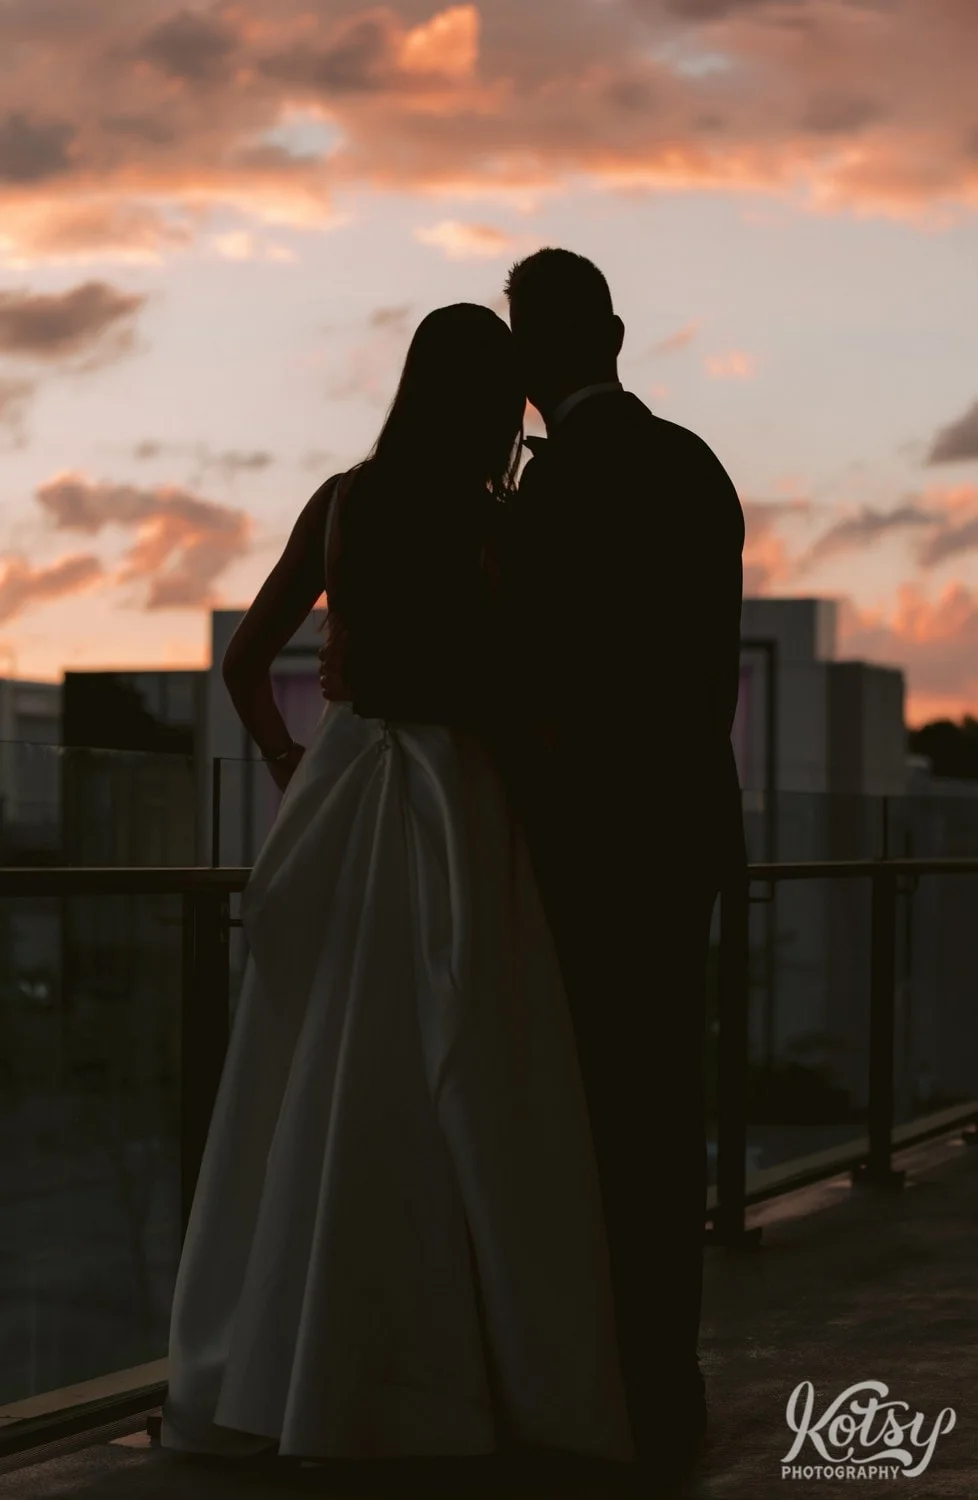 A silhouette of a bride and groom on a balcony with a beautiful sunset ahead of them. Photographed during a Village Loft wedding reception in Toronto, Canada